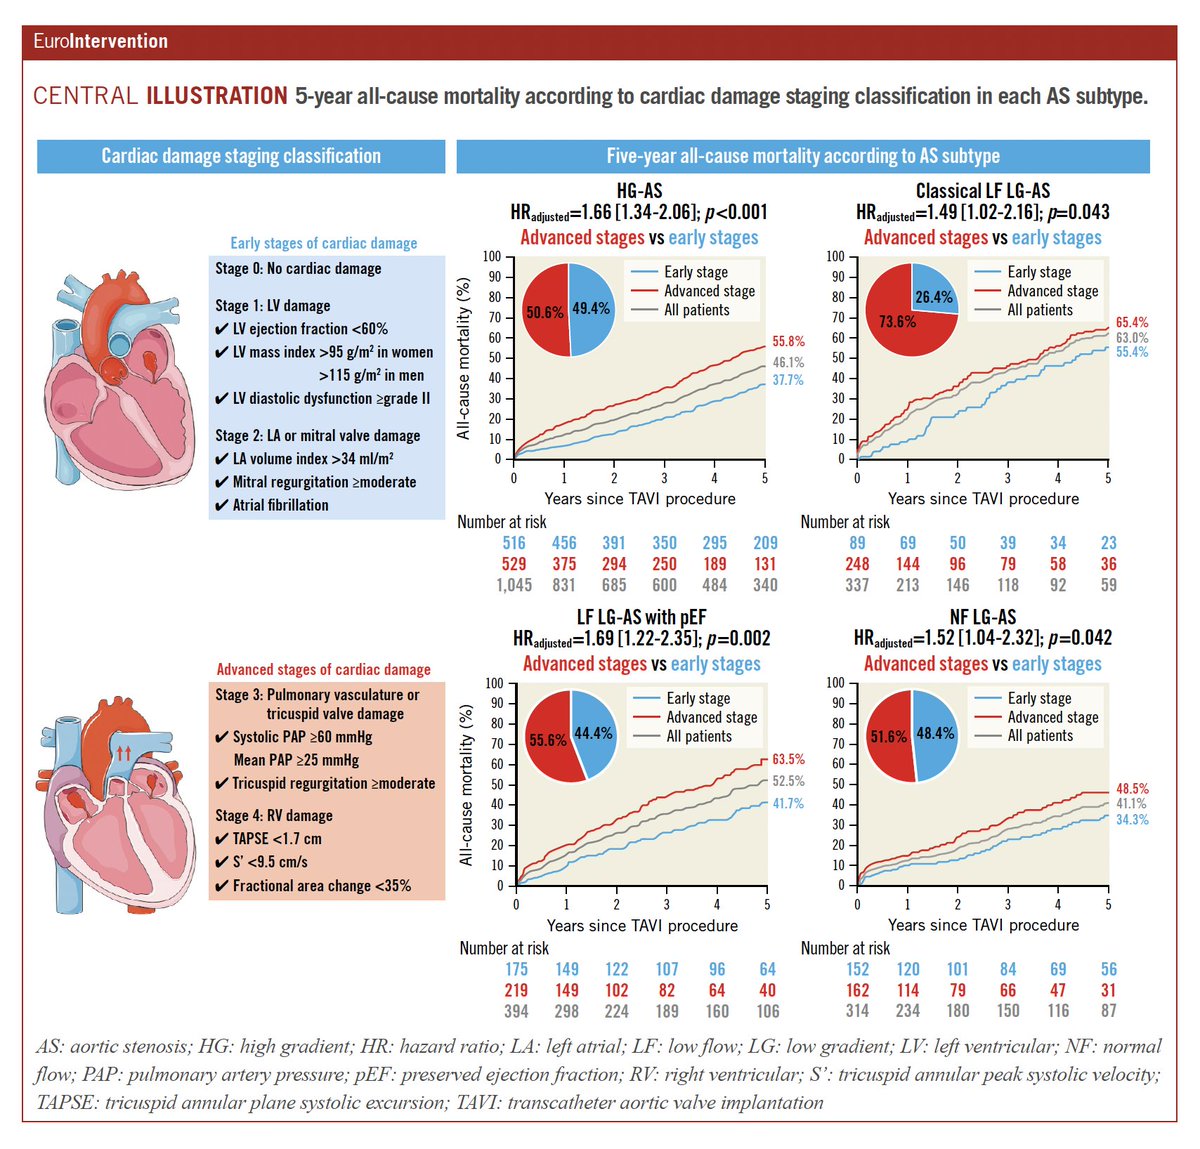 In this prospective TAVI registry of 2,090 patients across the hemodynamic spectrum of severe aortic stenosis, the cardiac damage staging classification stratified the risk of death irrespective of aortic stenosis subtypes (e.g., high or low gradient). eurointervention.pcronline.com/article/progno…